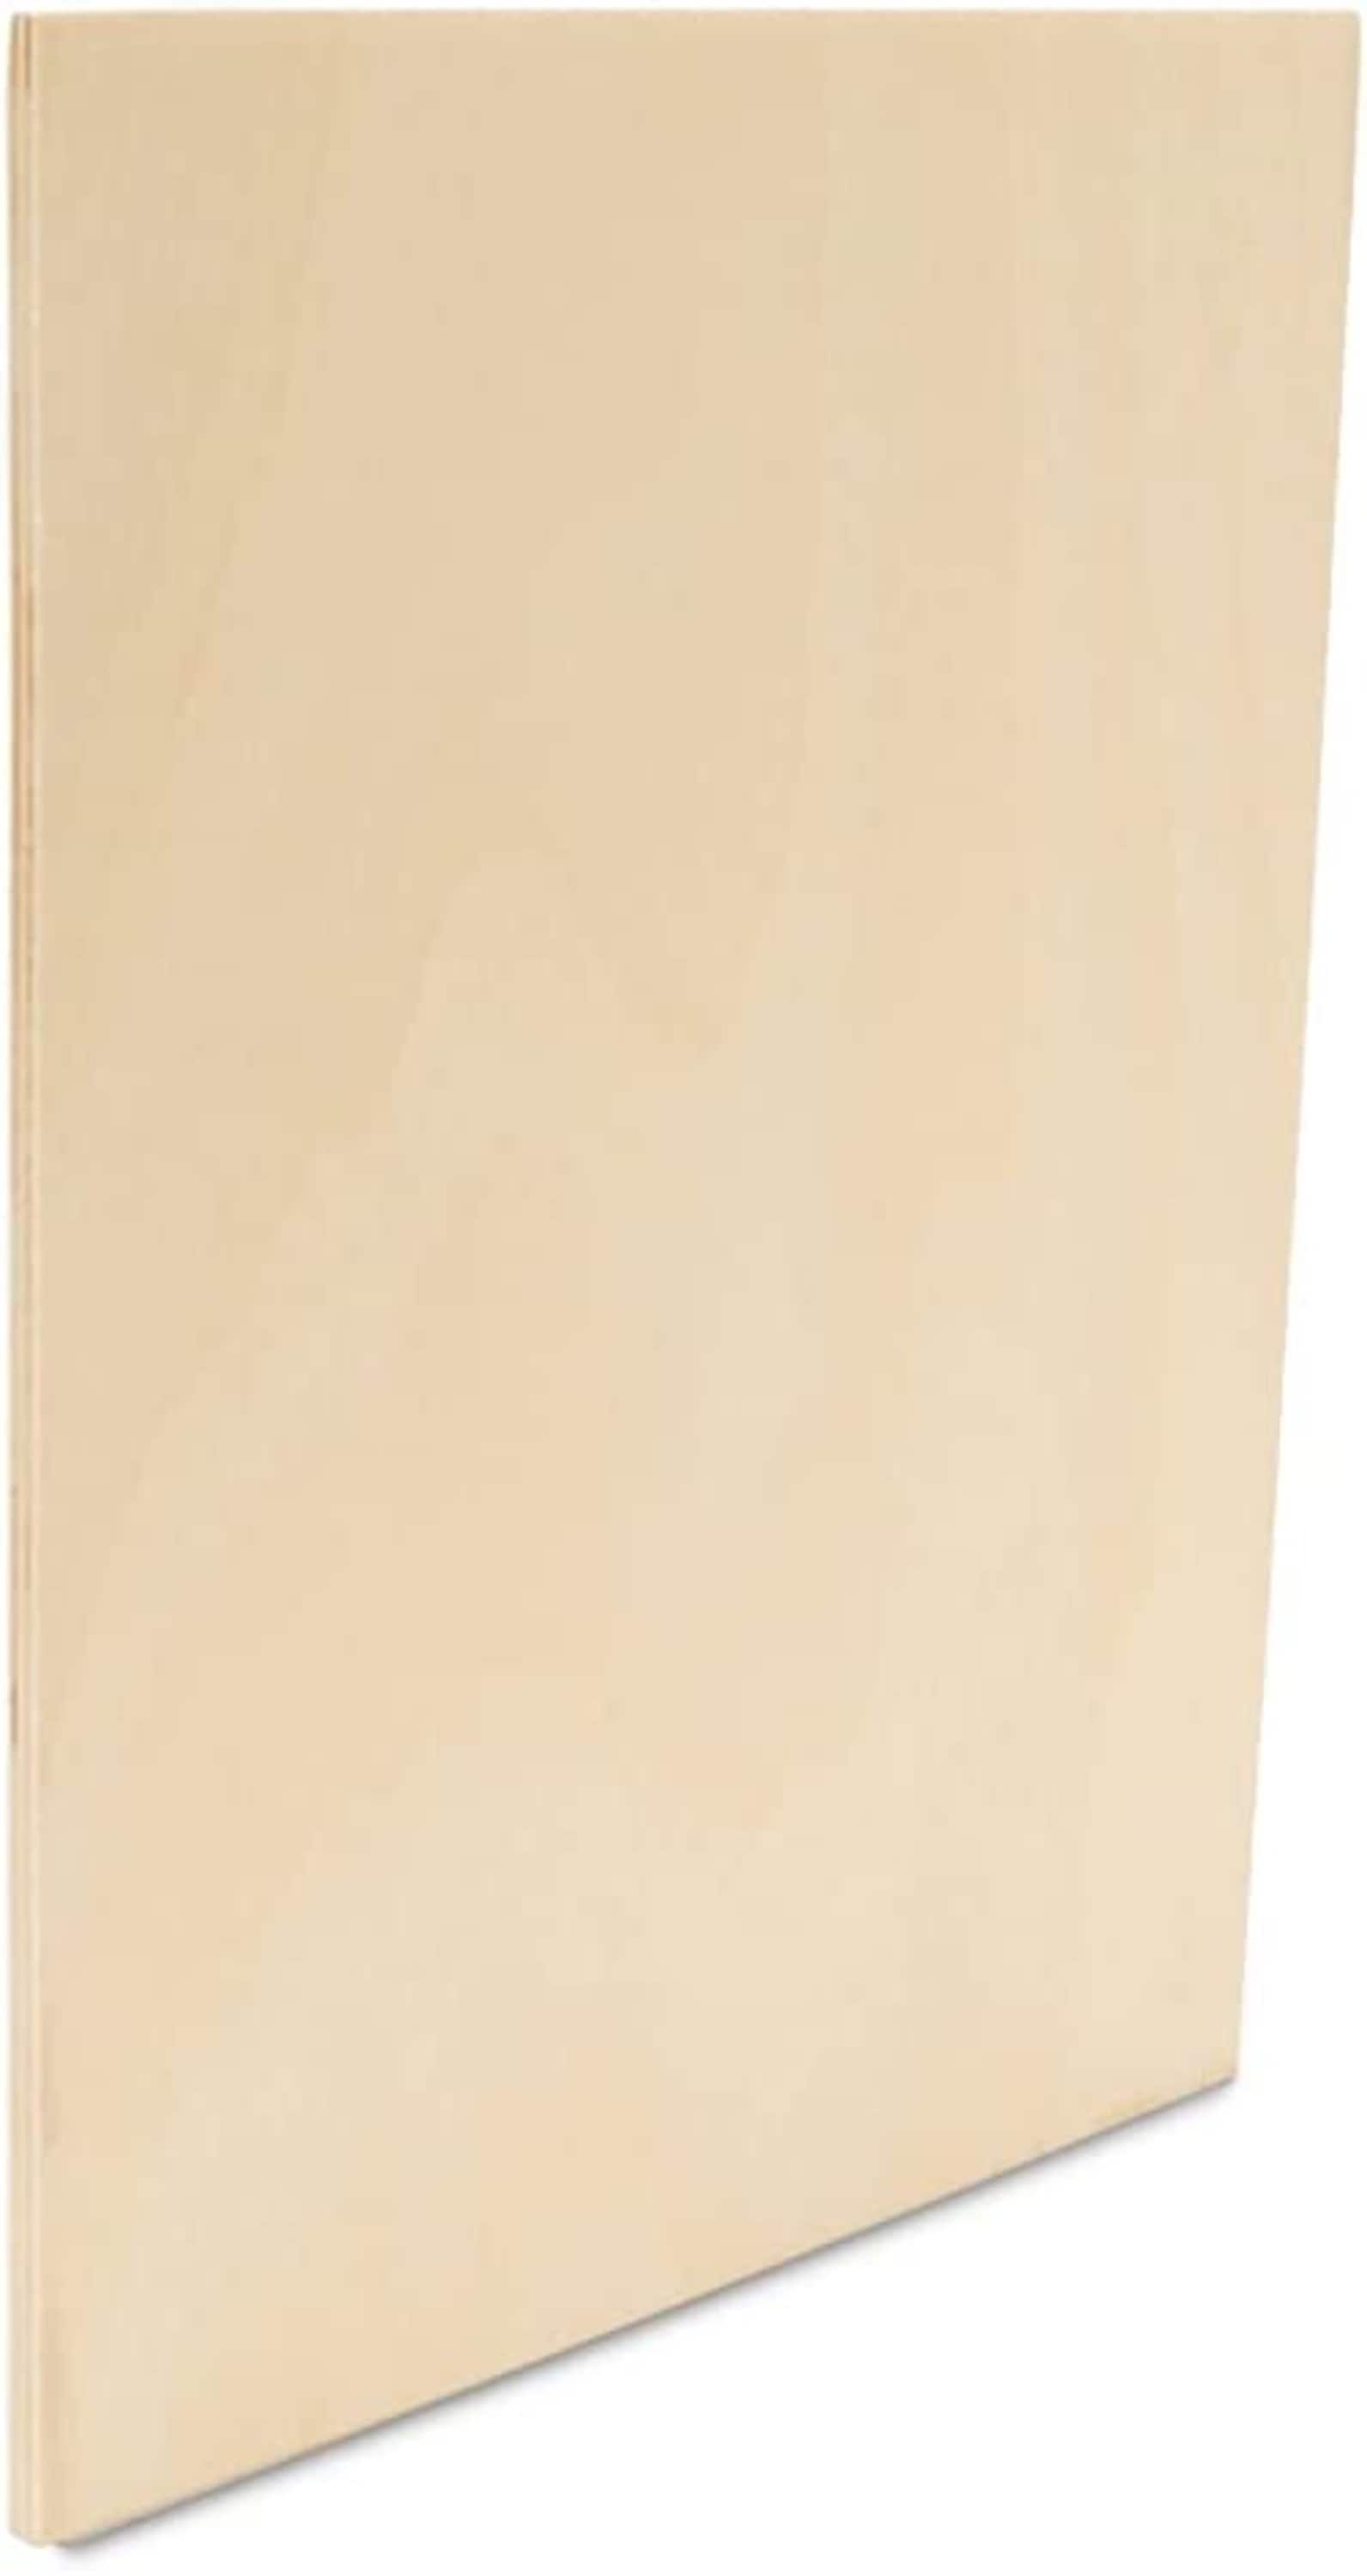 Birch Painting Panel 18 x 24 x 3/4-inch, Pack of 4 Large Wood Canvas Boards  for Painting, Blank Signs for Crafts, by Woodpeckers 